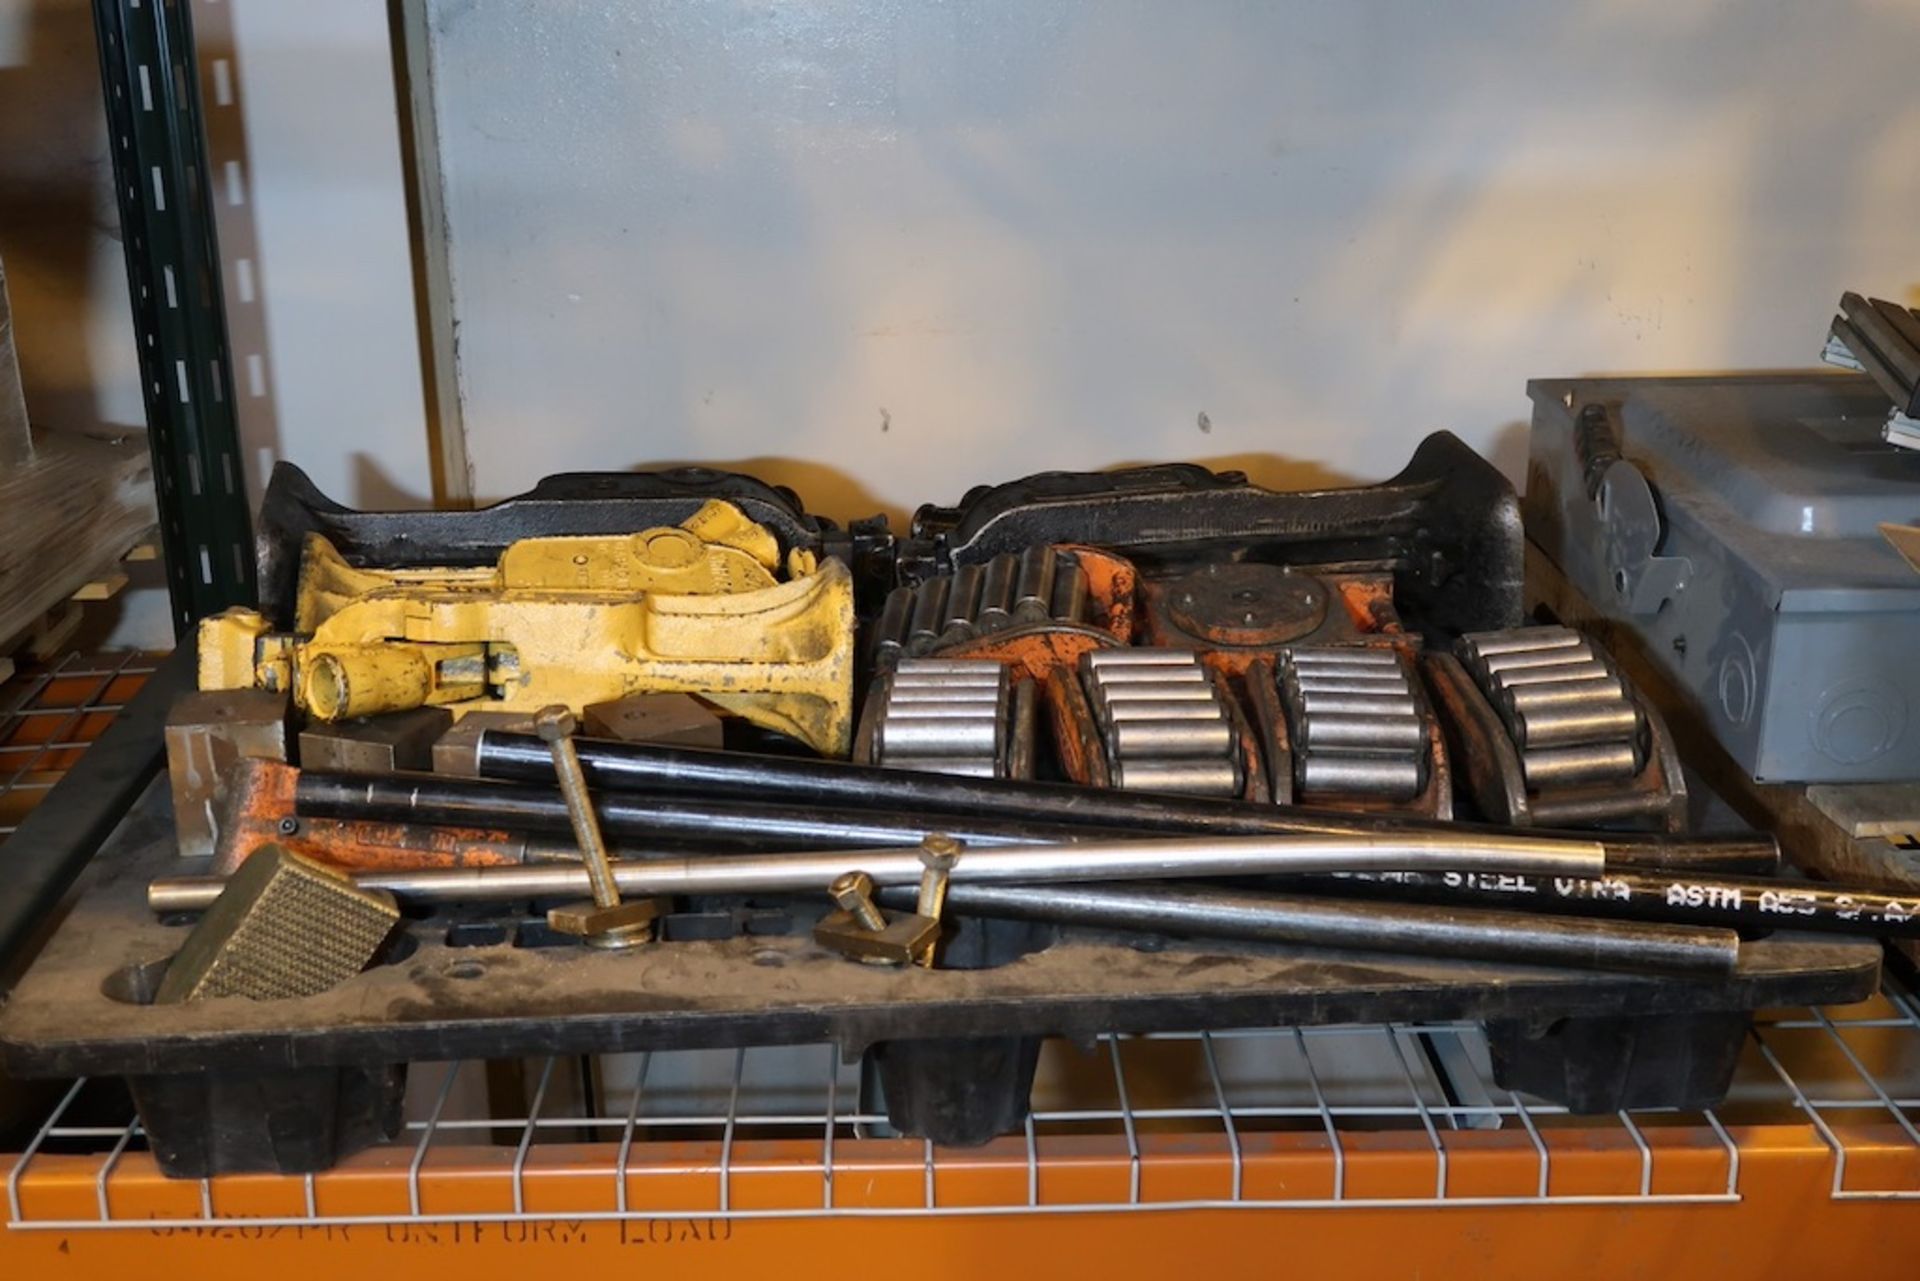 Contents of (1) Sections of Pallet Racking, Including Misc. Machine Parts, Etc. - Image 4 of 7